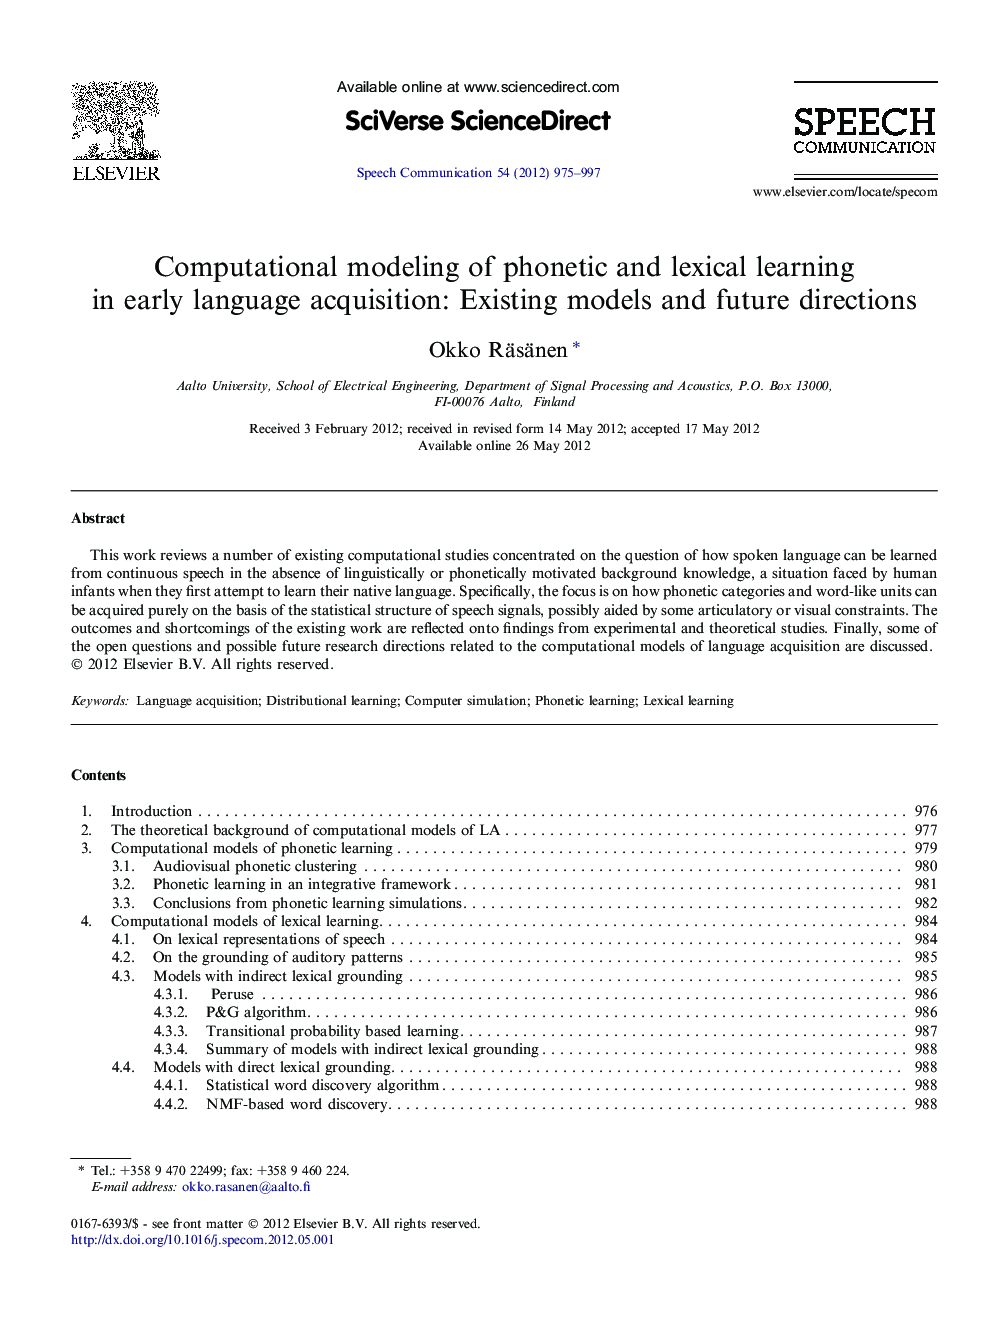 Computational modeling of phonetic and lexical learning in early language acquisition: Existing models and future directions